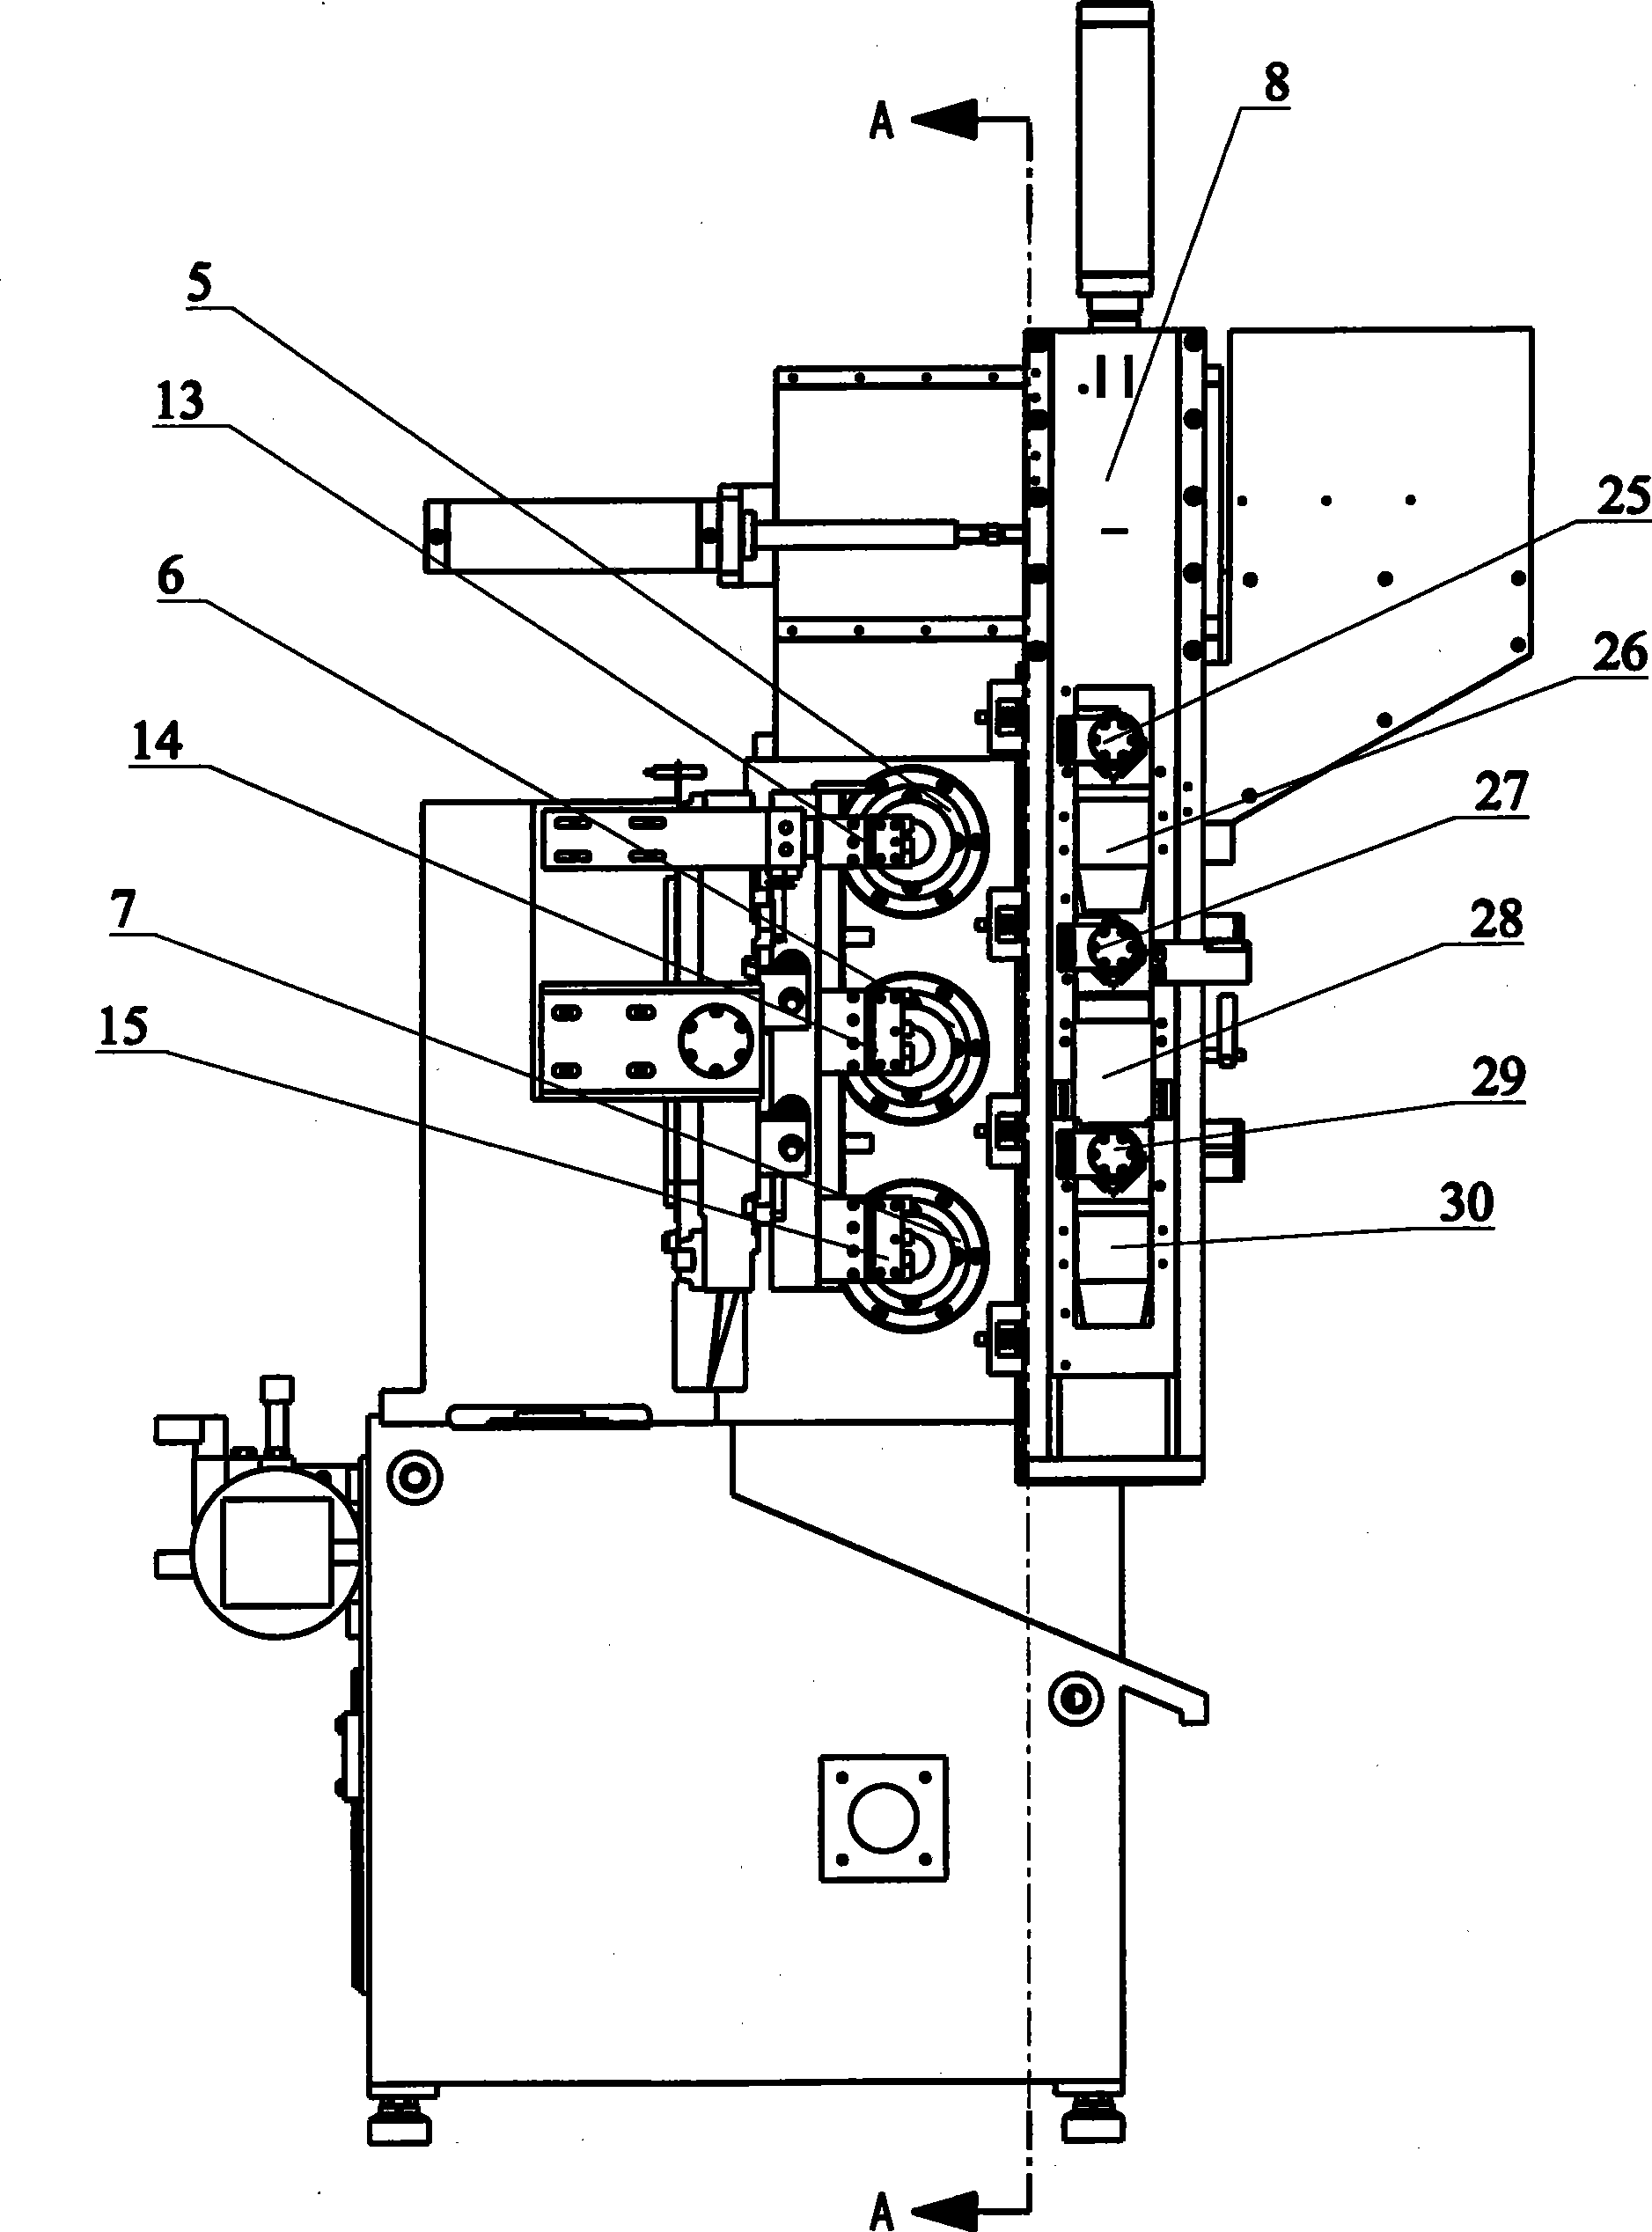 Full-automatic three-primary shaft combined lathe